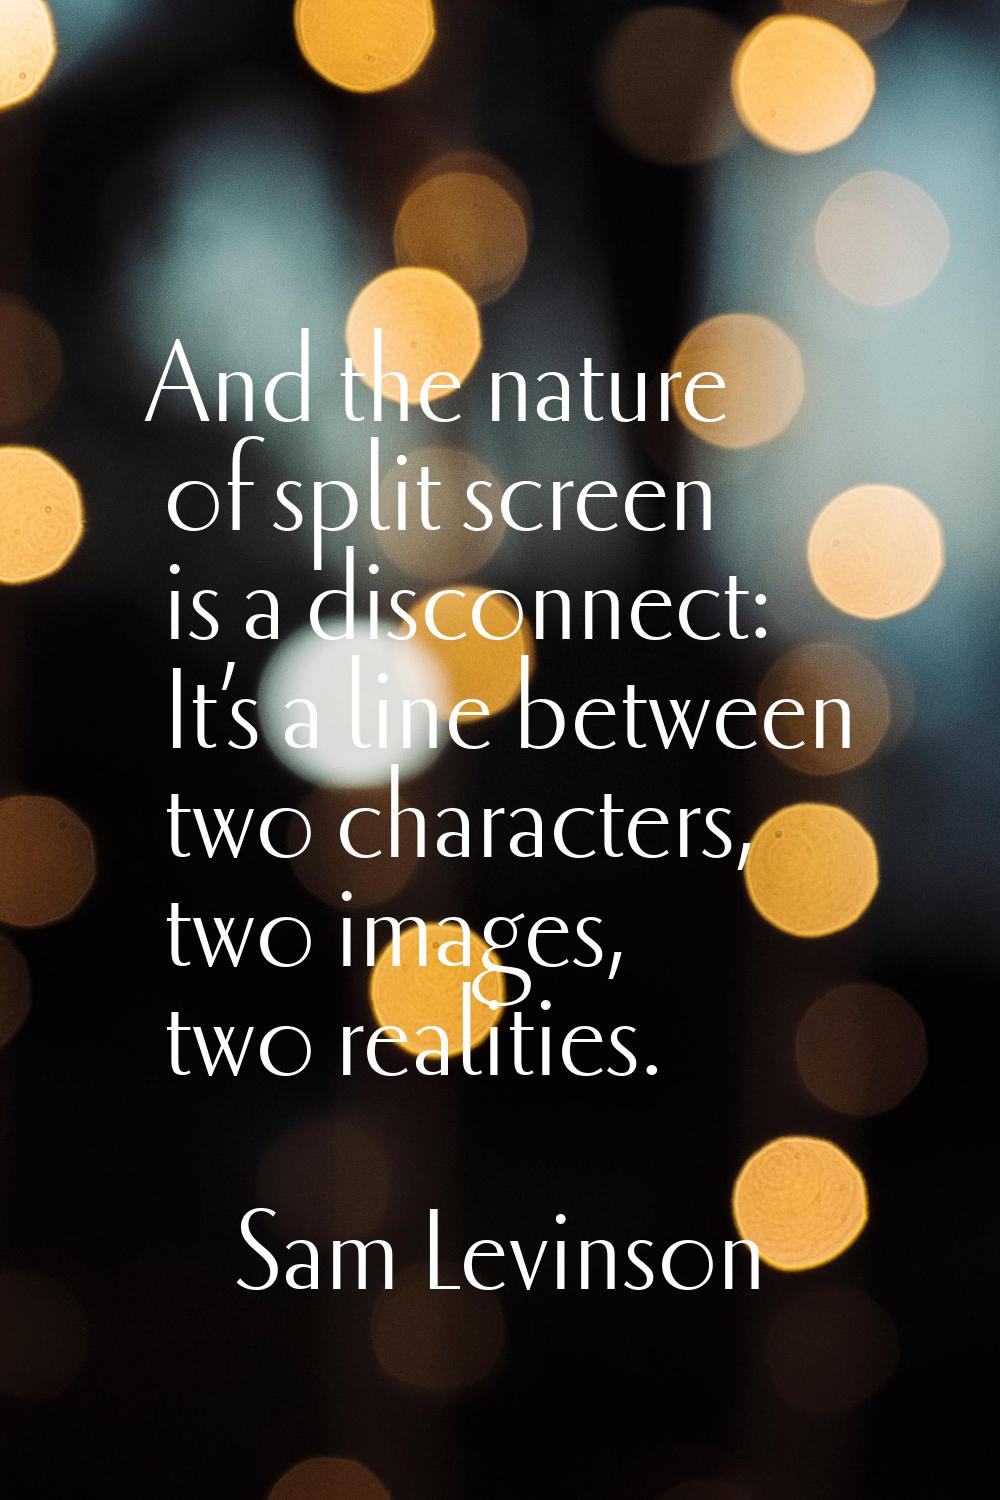 And the nature of split screen is a disconnect: It’s a line between two characters, two images, two